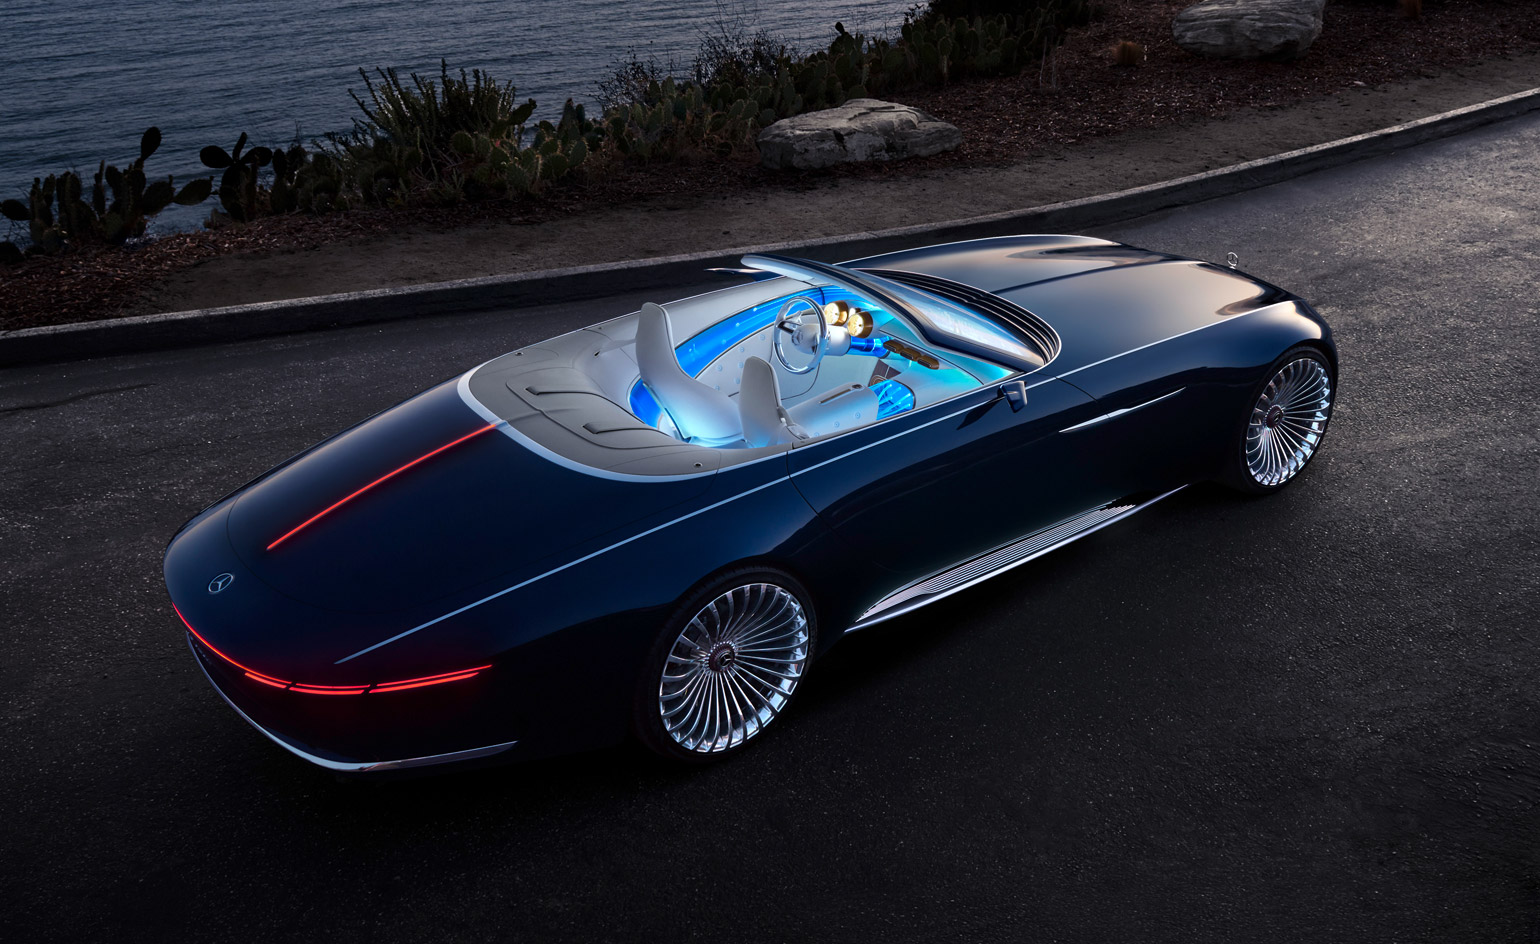 Mercedes Maybach 6 Cabriolet , HD Wallpaper & Backgrounds